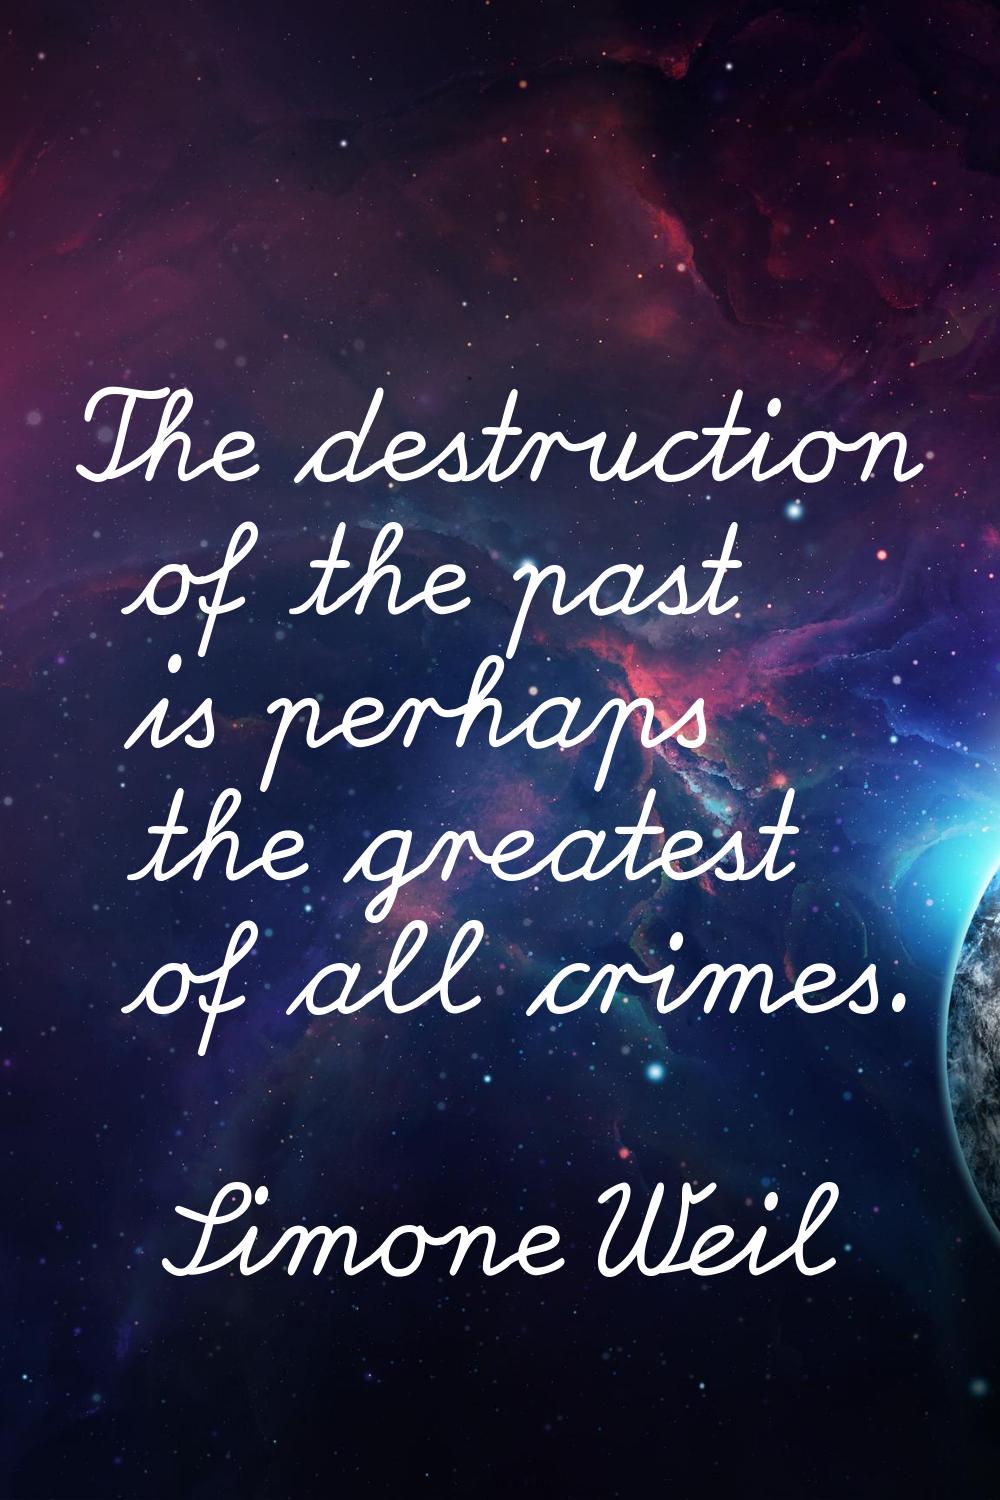 The destruction of the past is perhaps the greatest of all crimes.